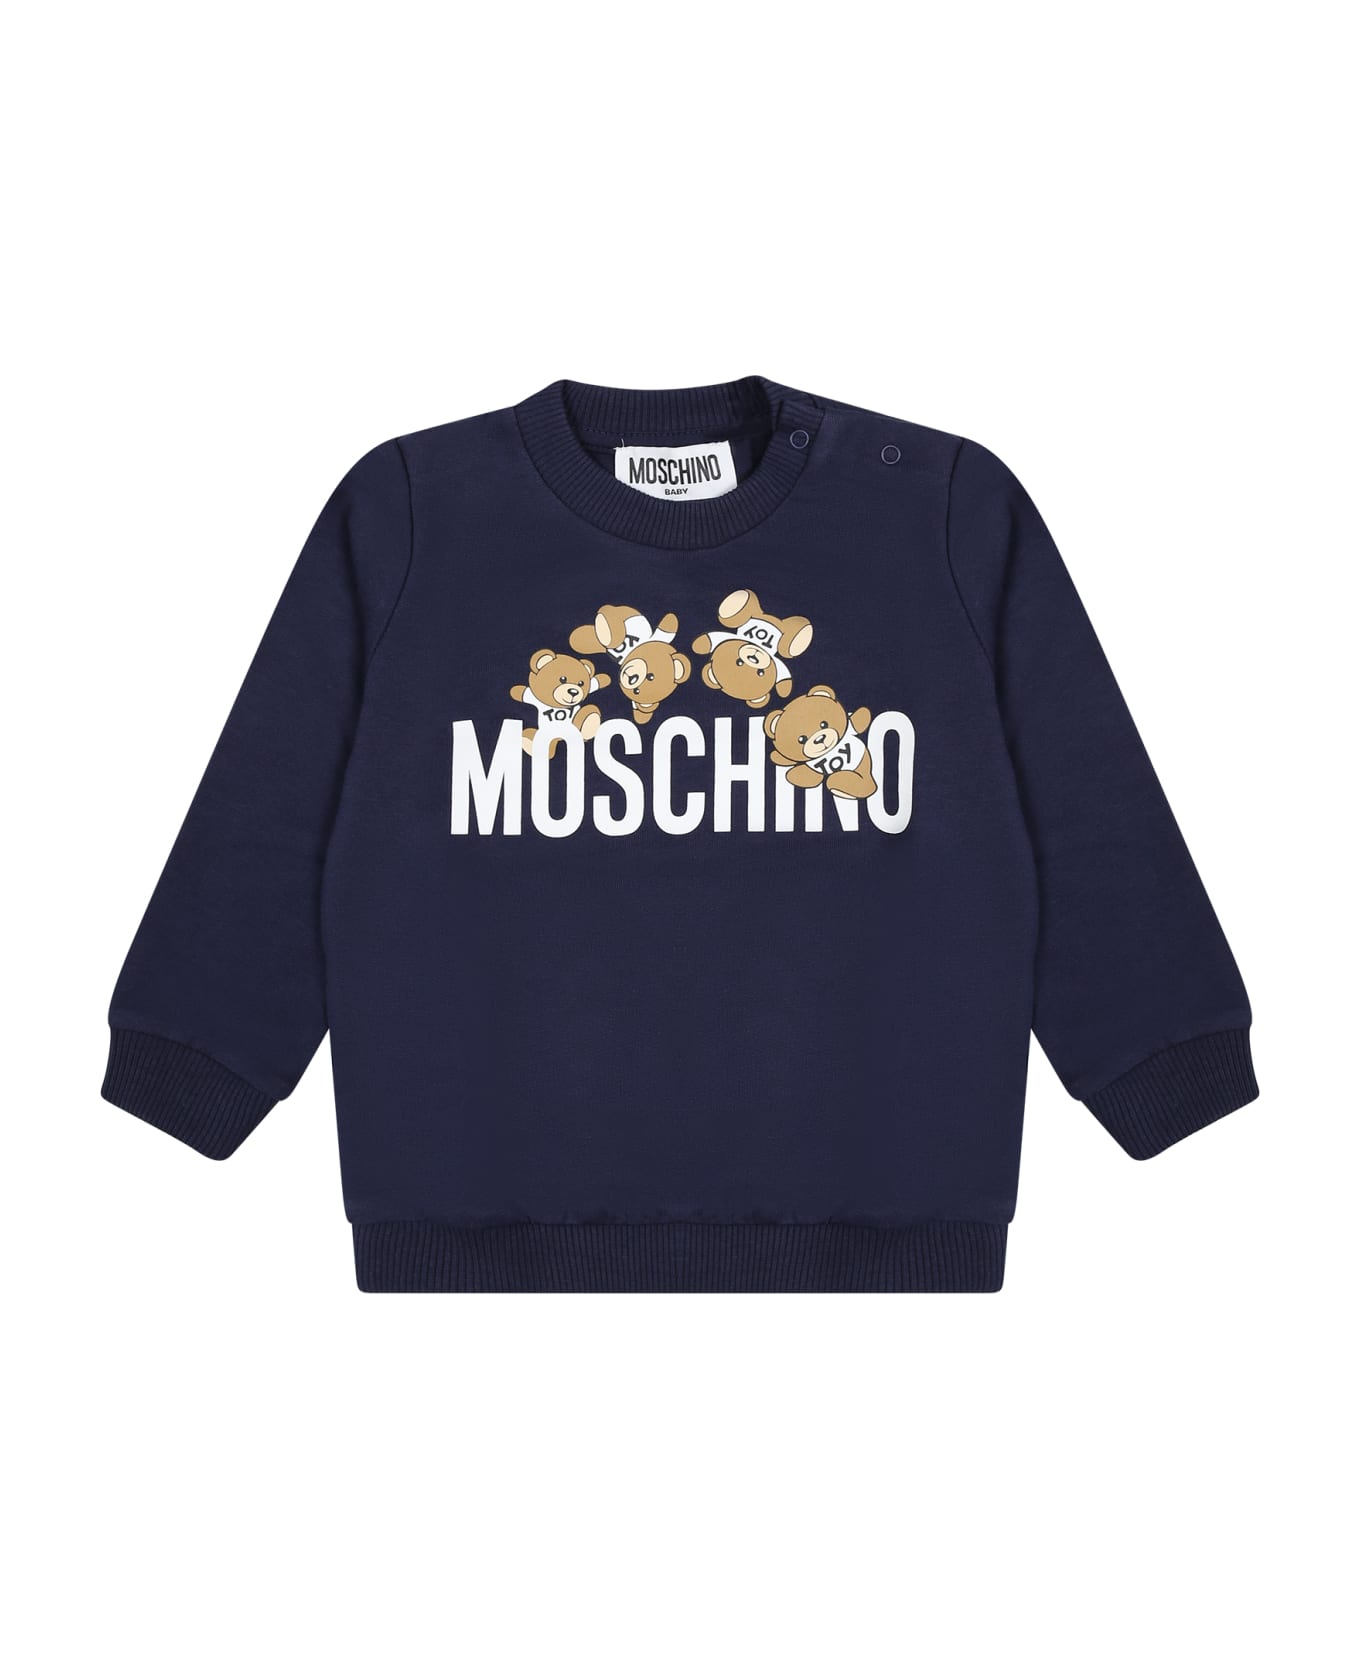 Moschino Blue Sweatshirt For Babies With Teddy Bears And Logo - Blue